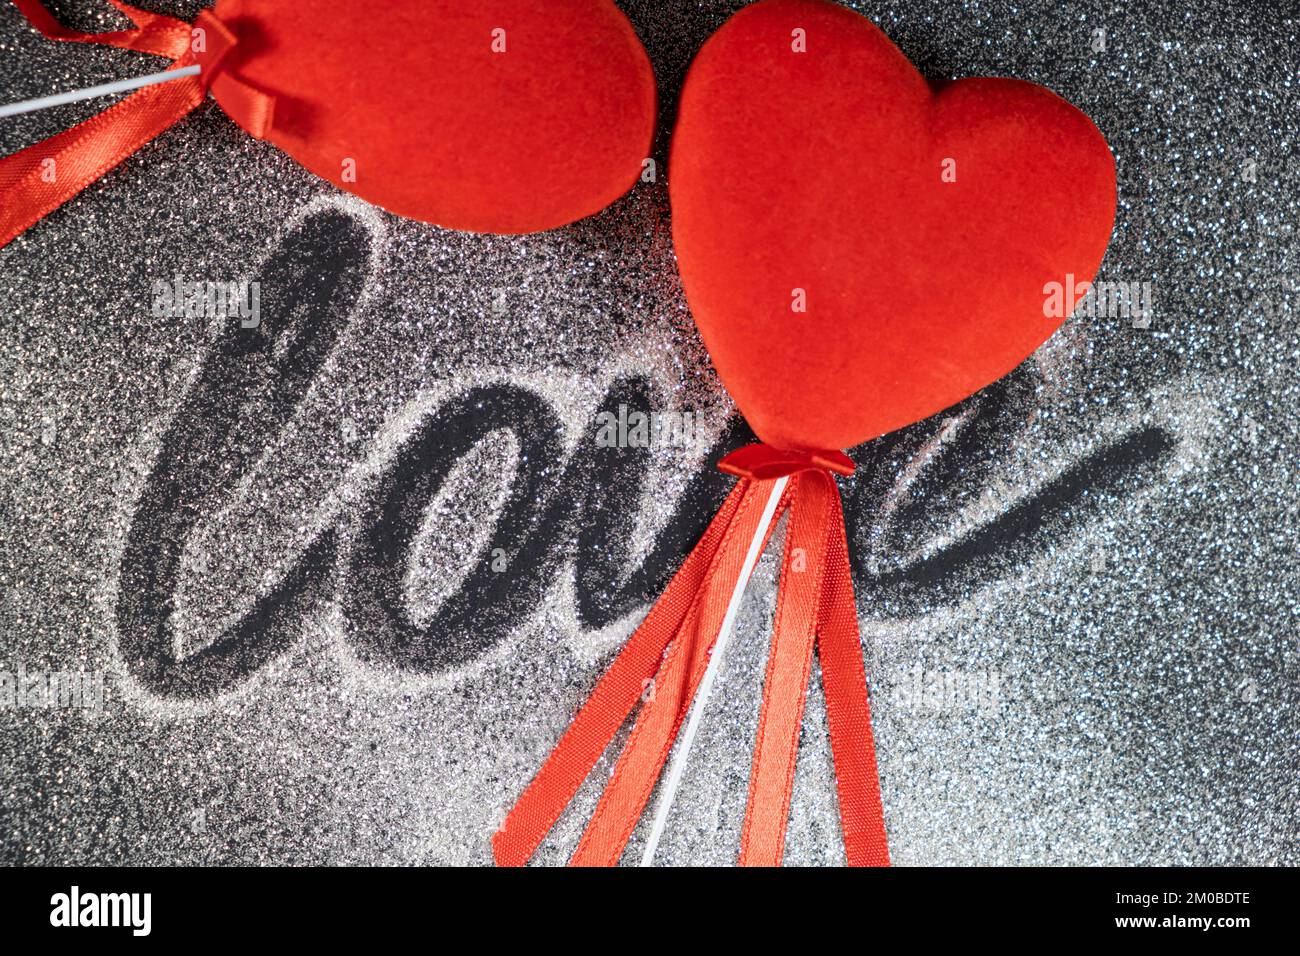 Valentine's Day, two red loving hearts on a black background with sequins and the text of love. Stock Photo